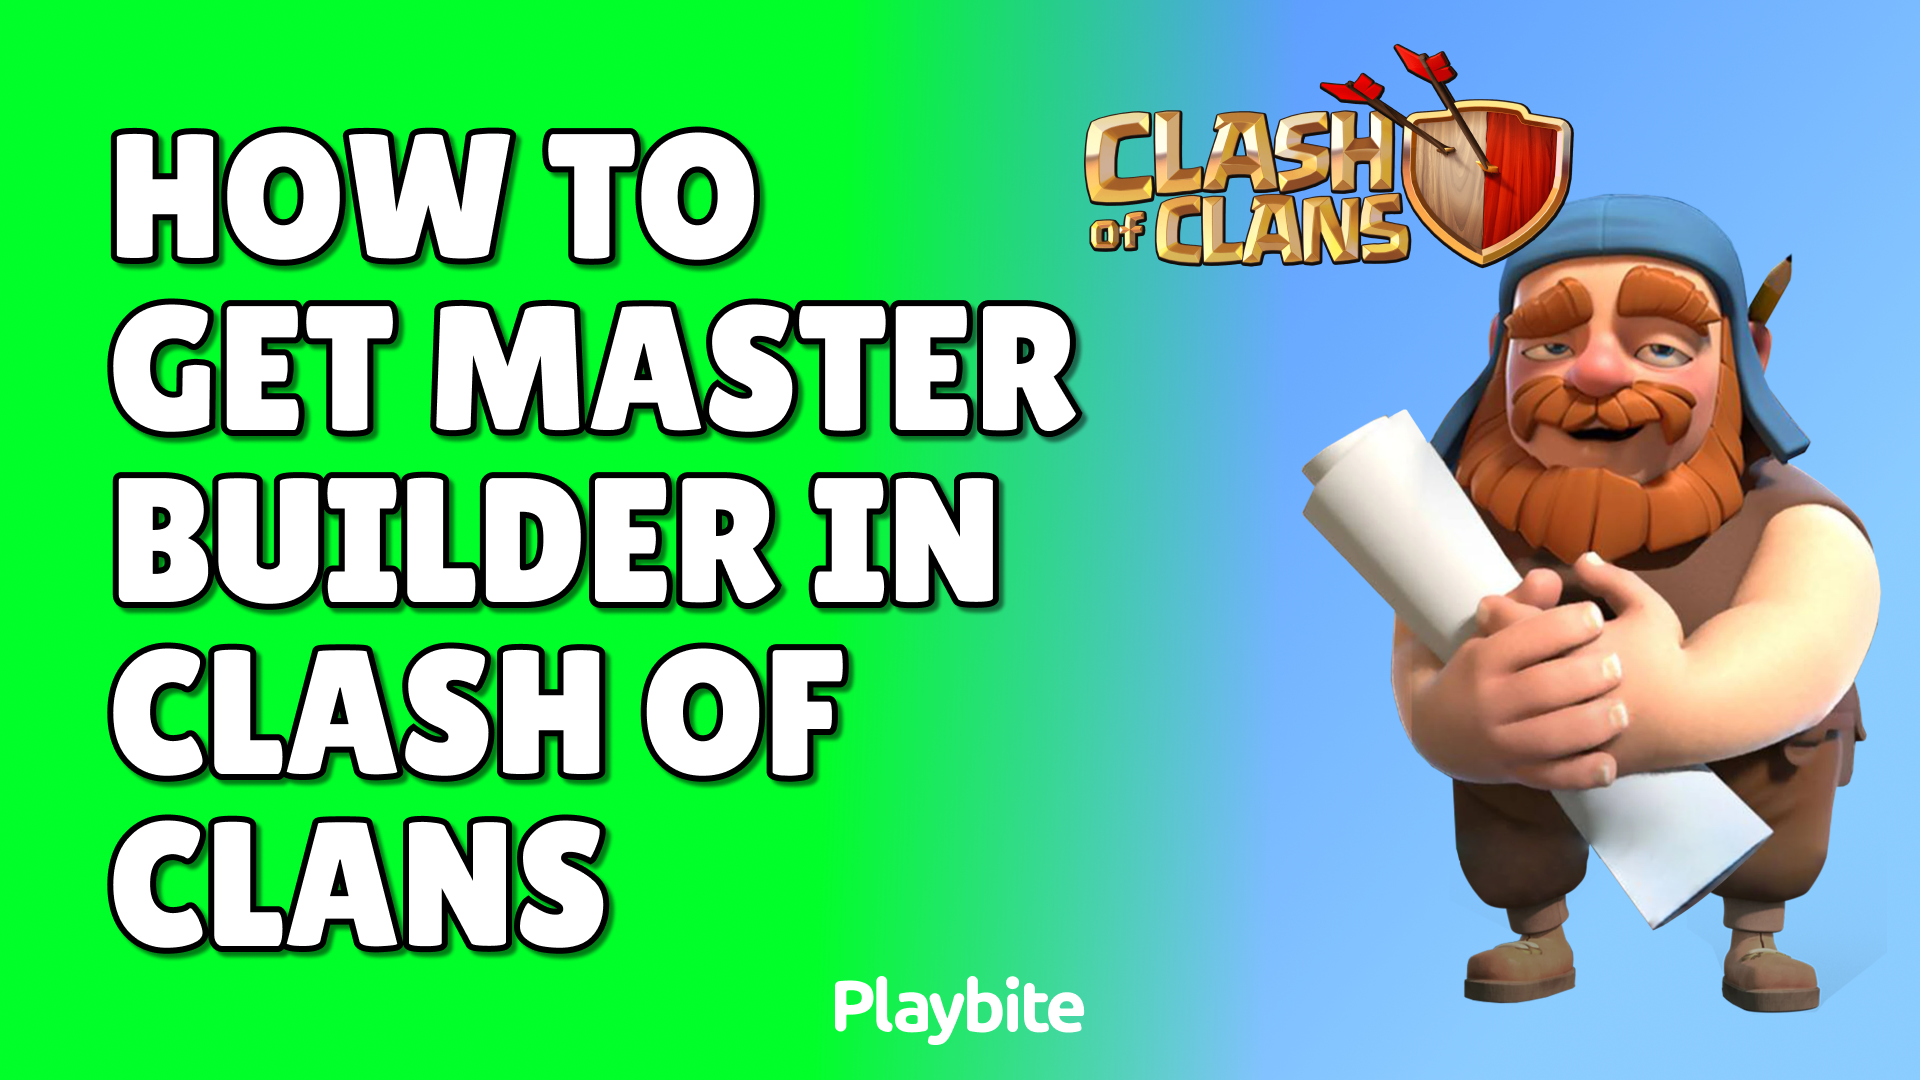 How To Get Master Builder In Clash Of Clans?